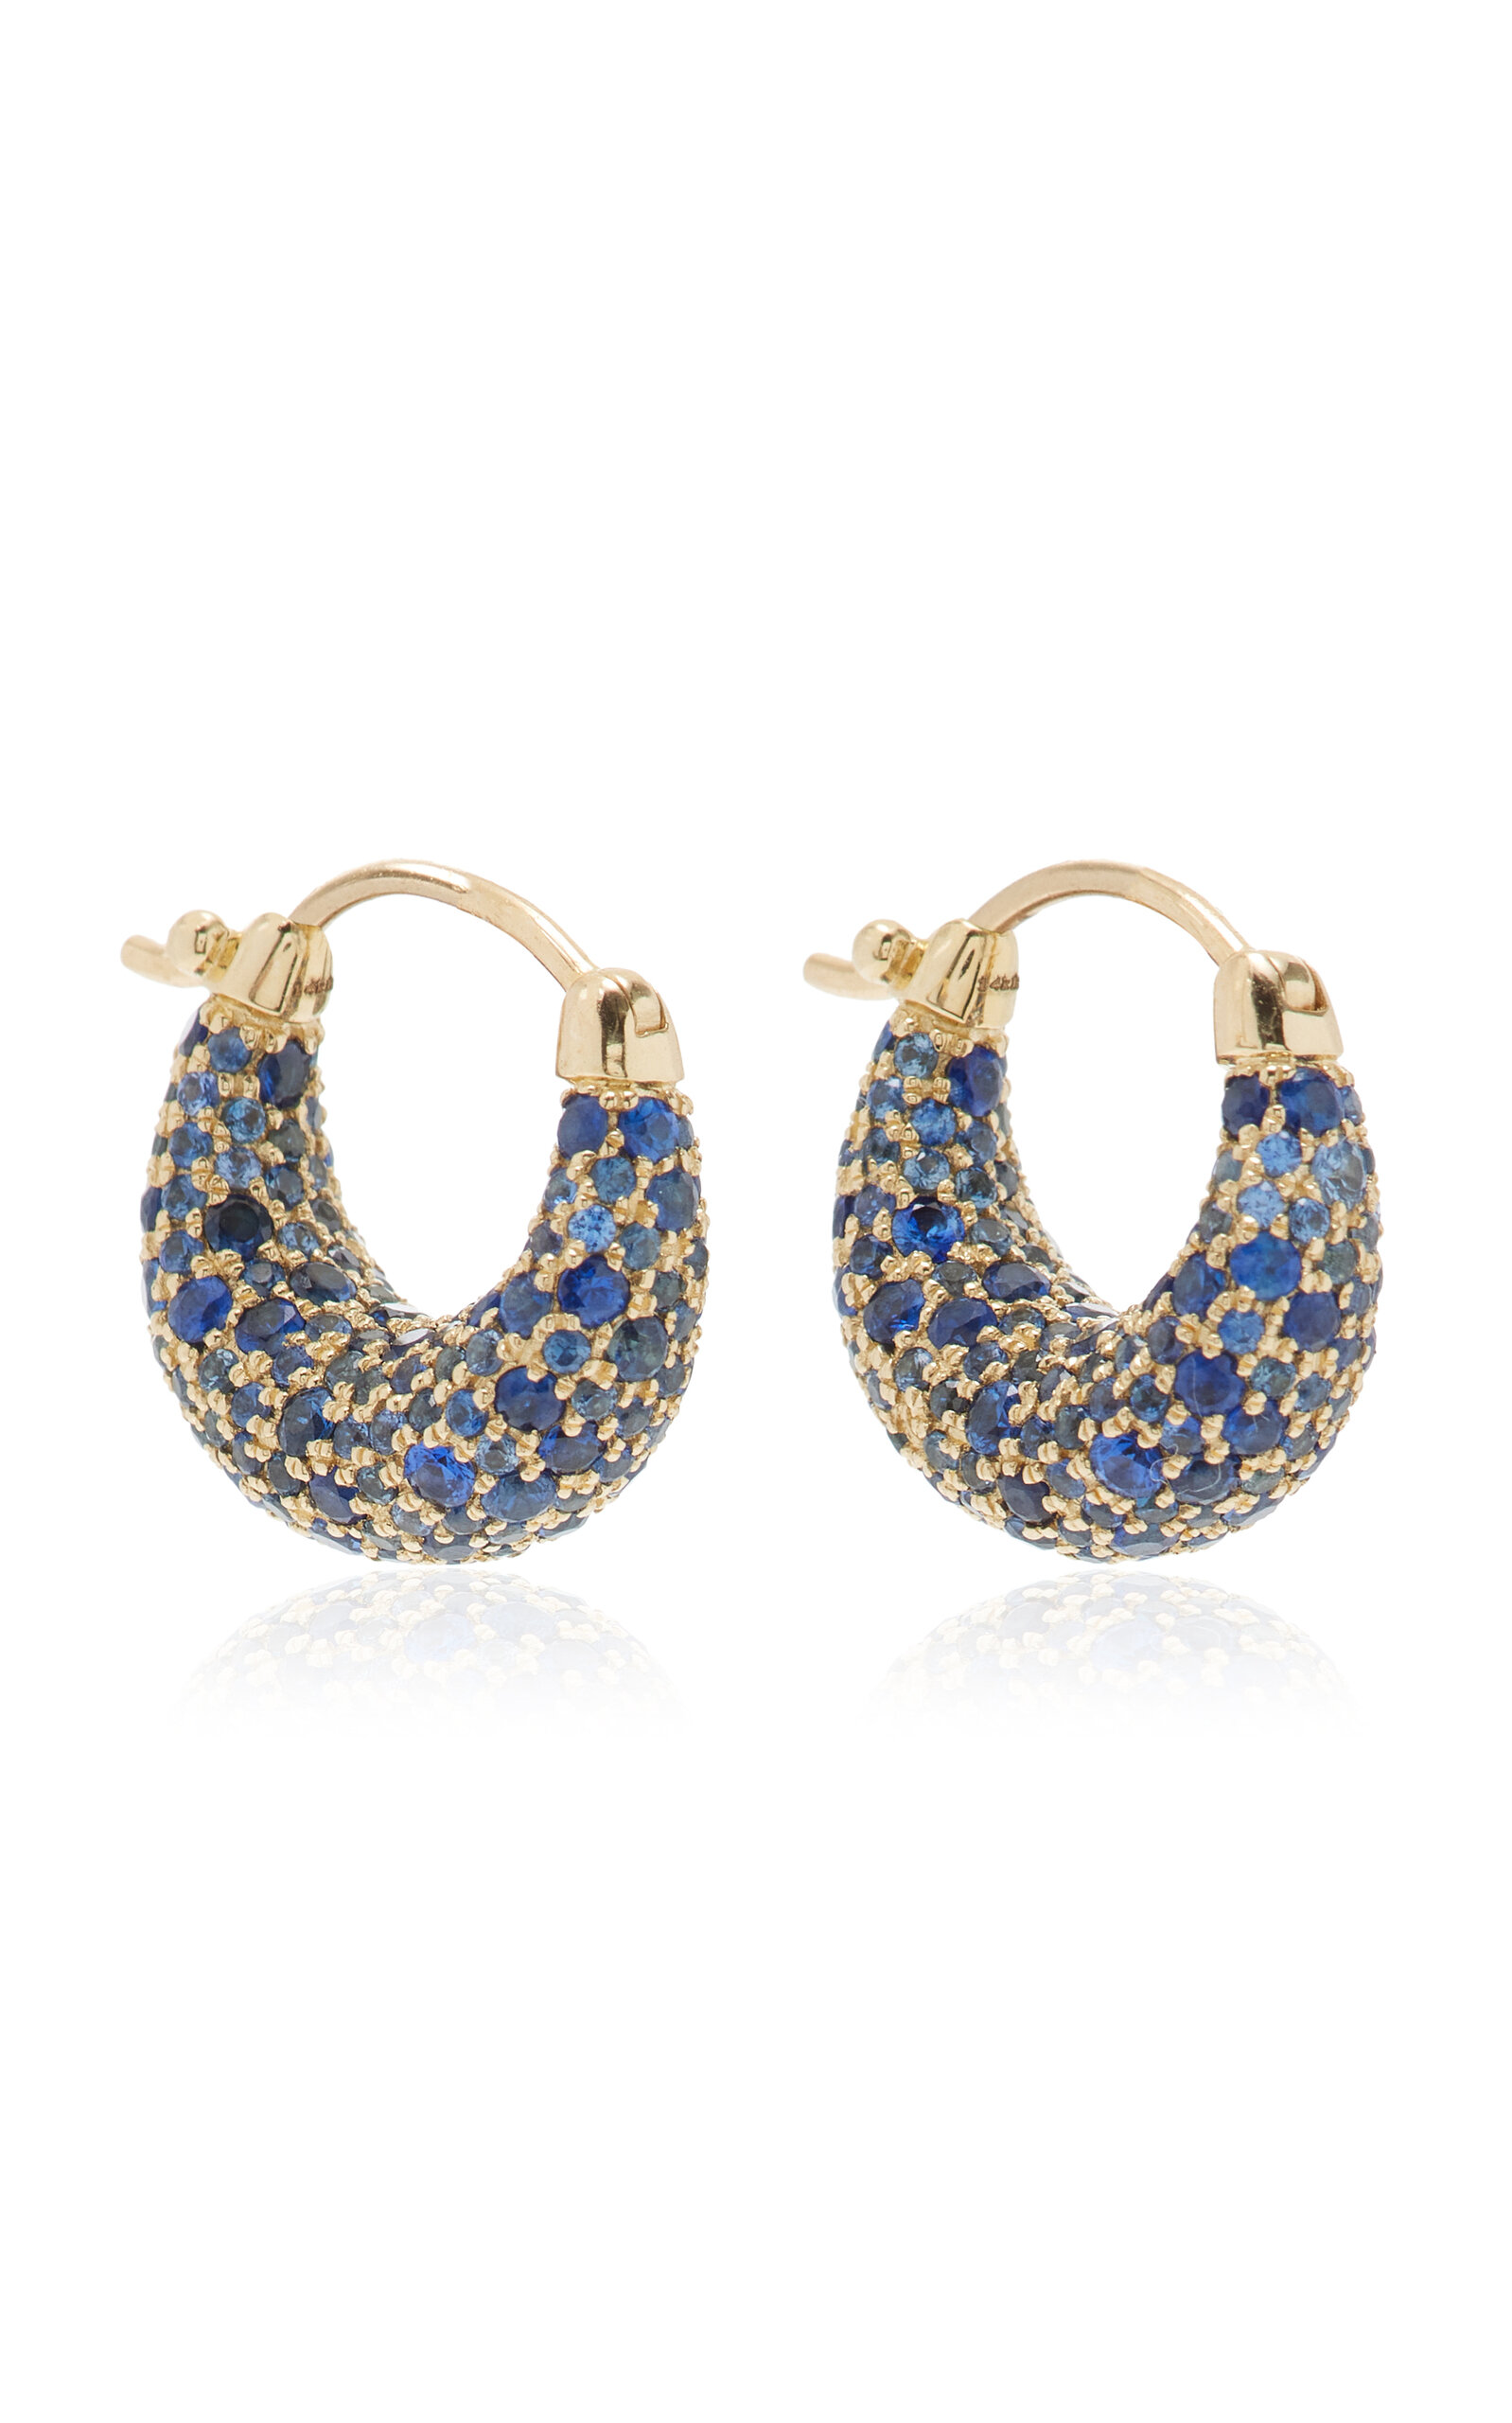 Jane Taylor Sugar Dipped 14k Yellow Gold Sapphire Hoops In Blue